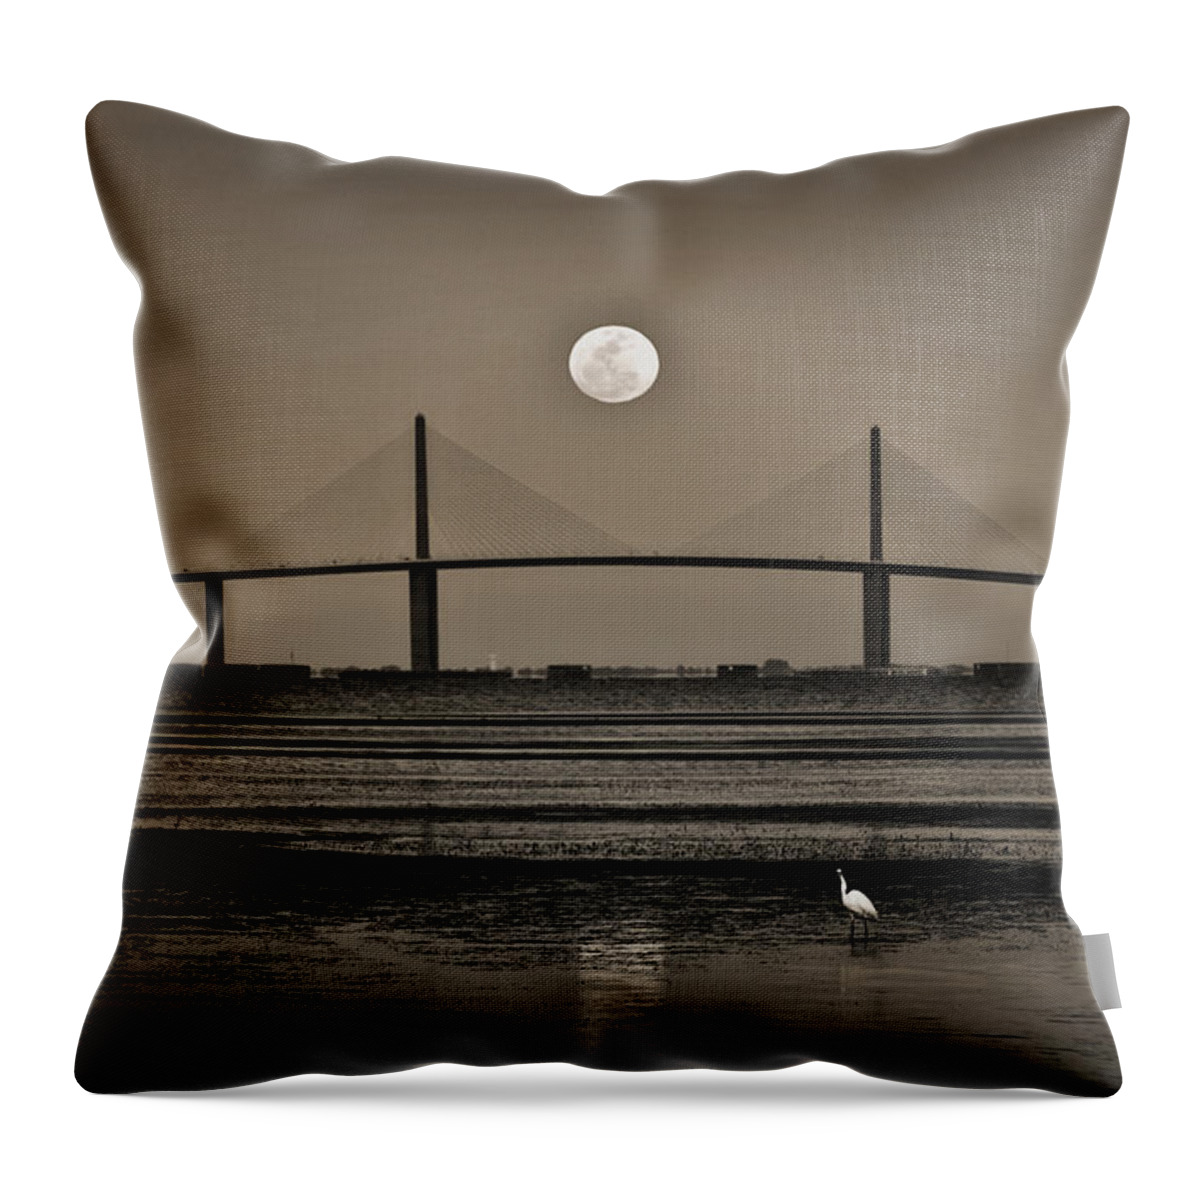 Moon Throw Pillow featuring the photograph Moonrise Over Skyway Bridge by Steven Sparks